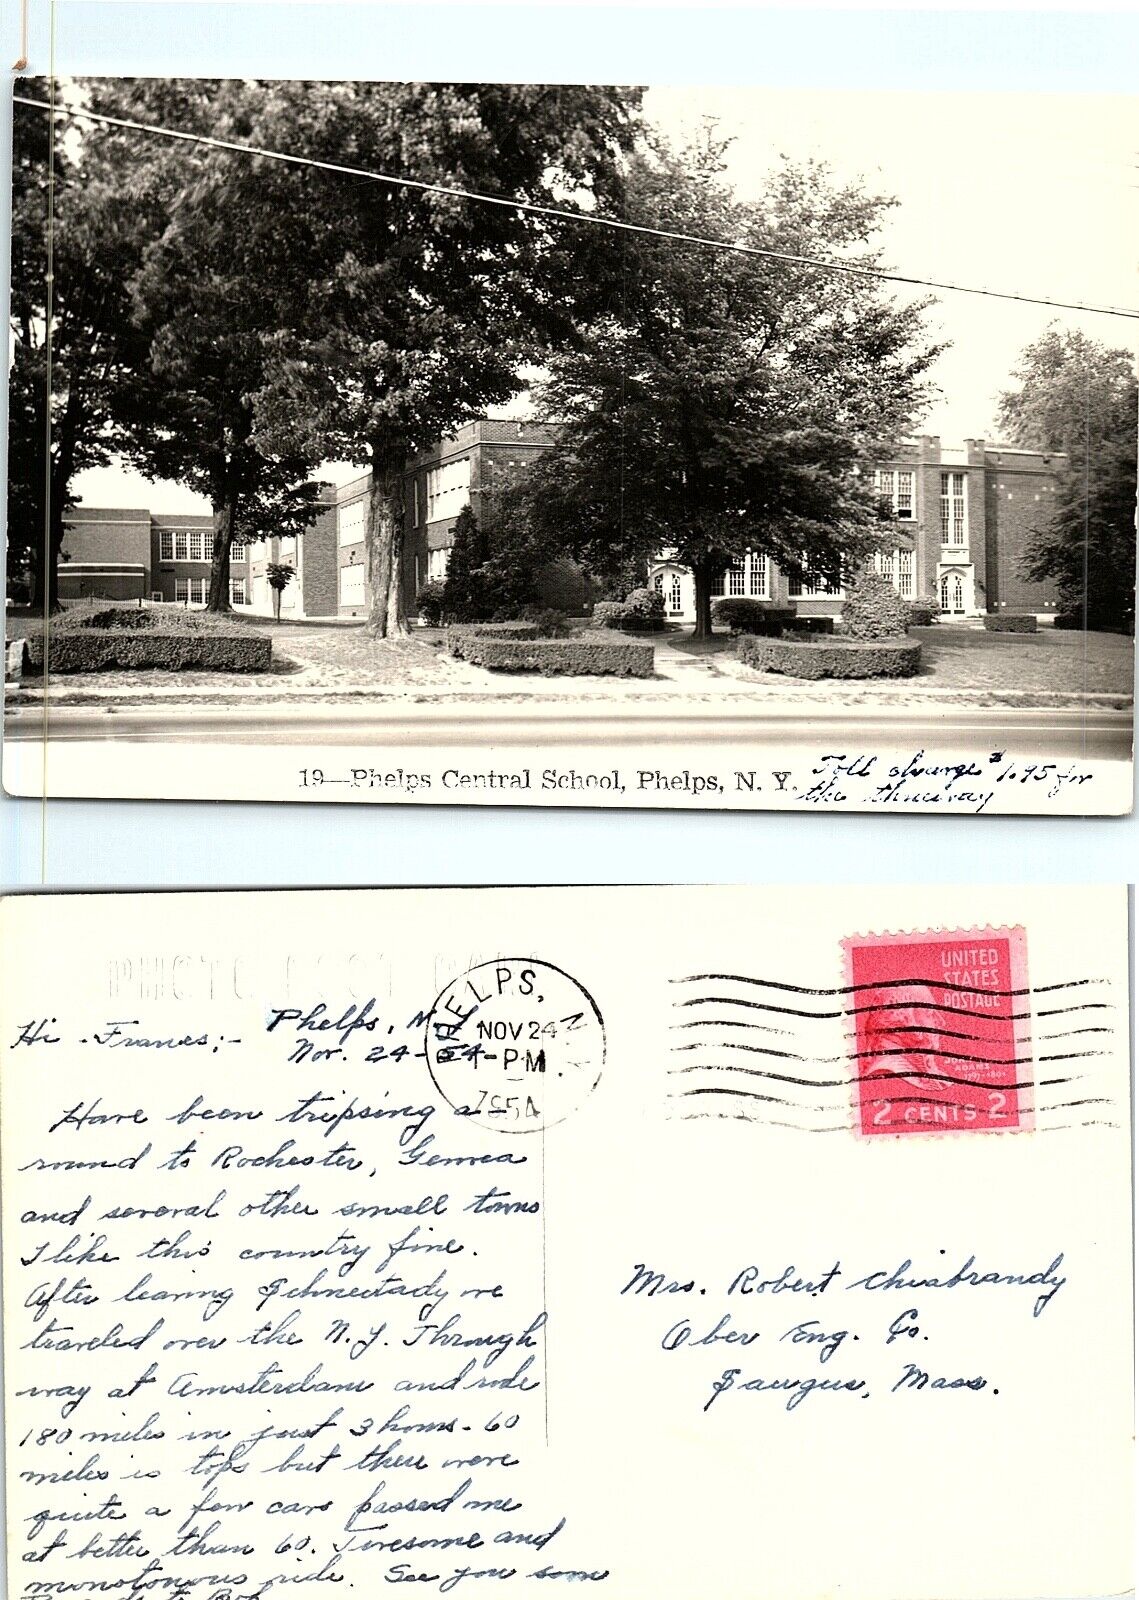 Phelps Central School, Phelps, New York, Real Photo, 1954